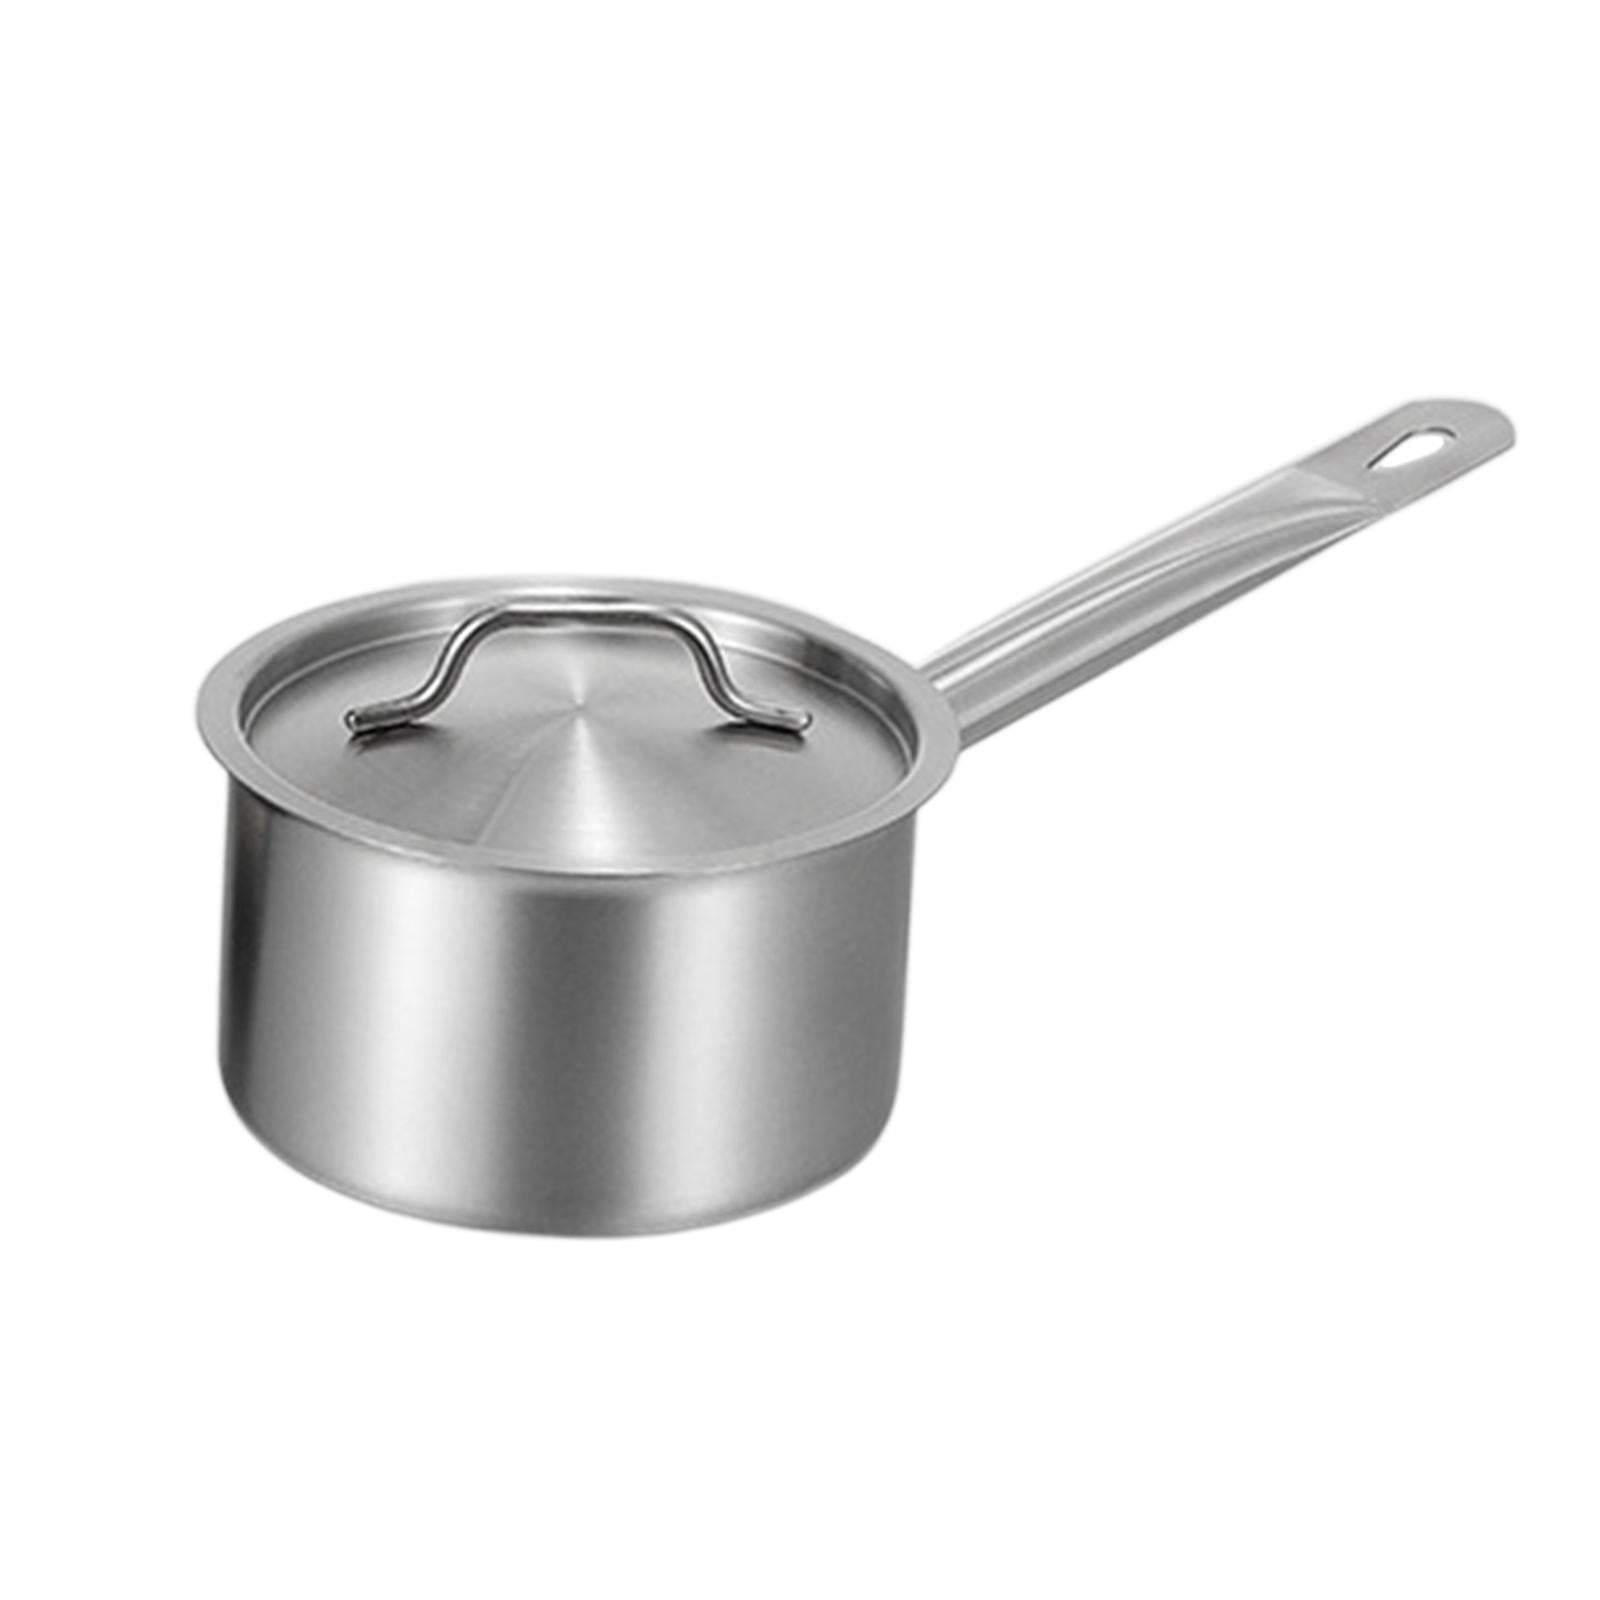 ROYDX Stainless Steel Sauce Pan with Lid, 3QT Saucepan with